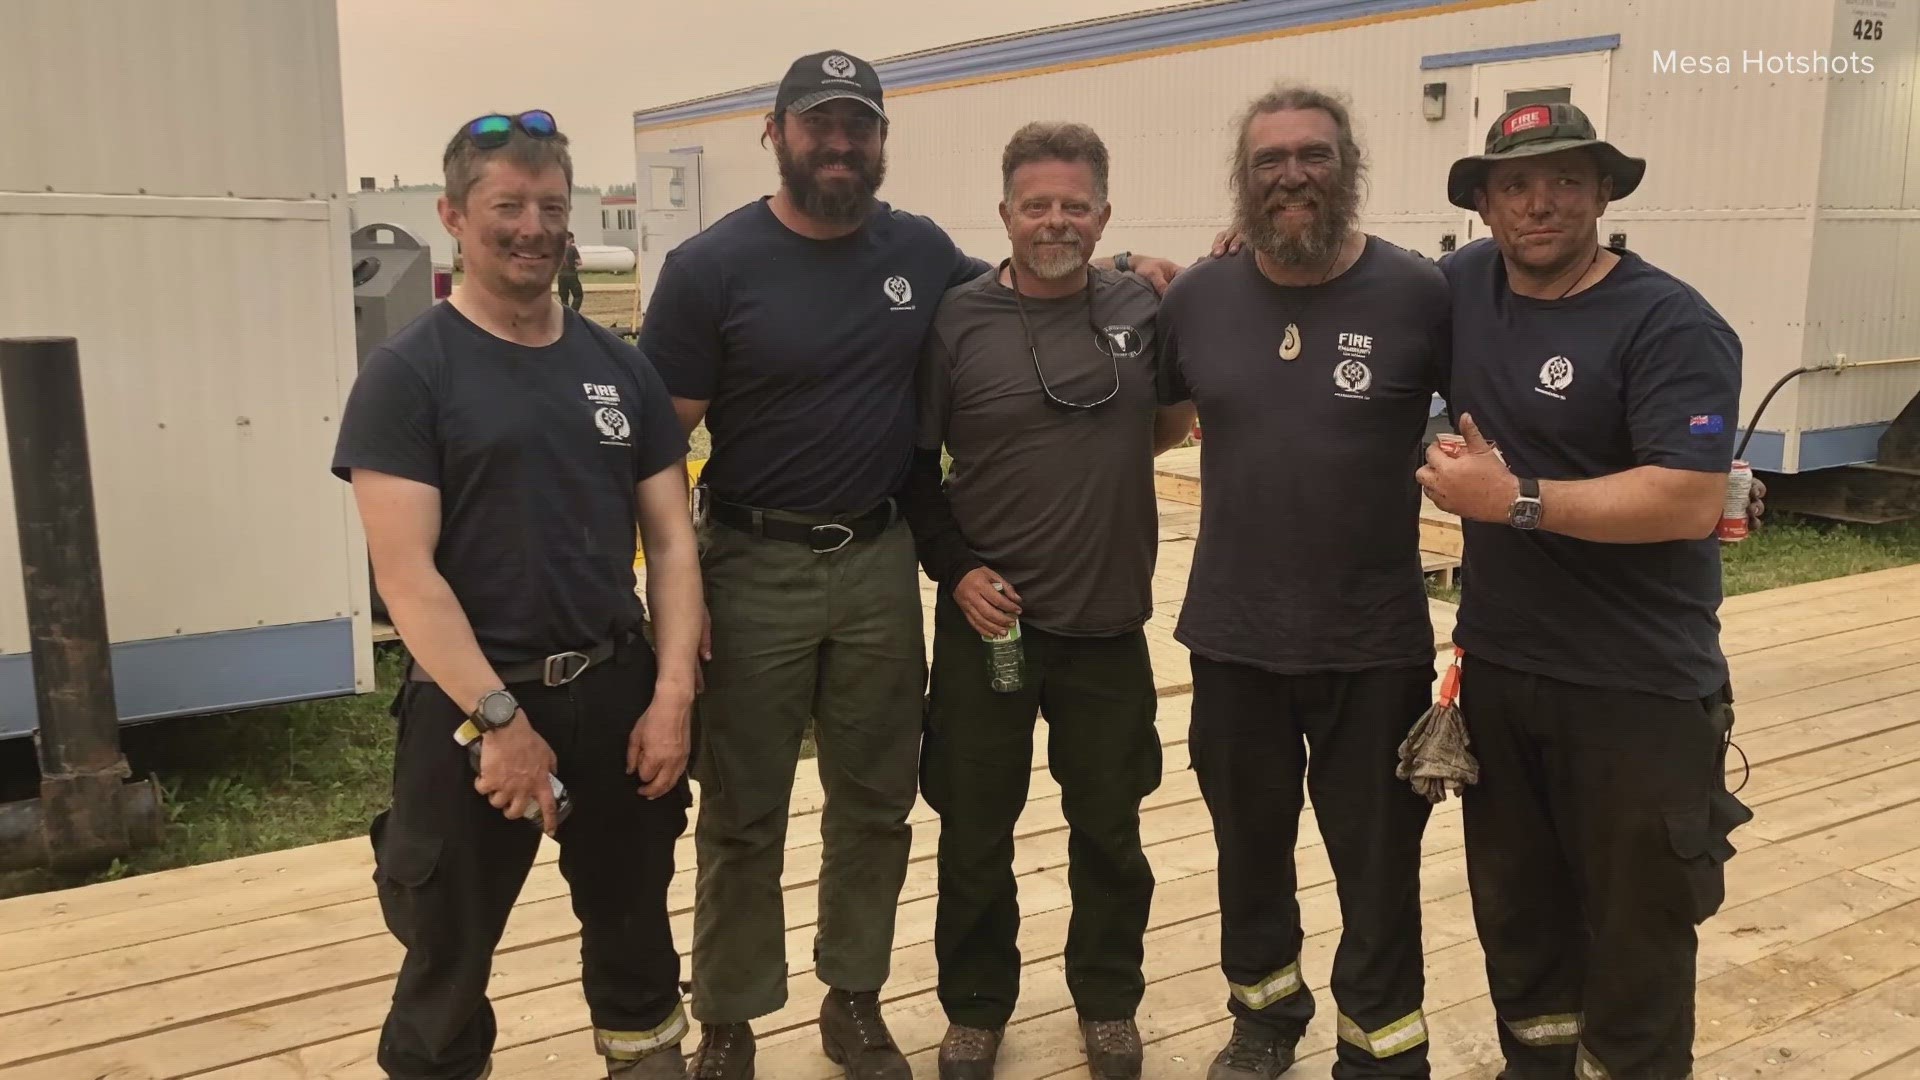 Mesa Hot Shot crews with the US Forest Service have been tapped to help our neighbors to the north fighting the unprecedented wildfires in Canada.